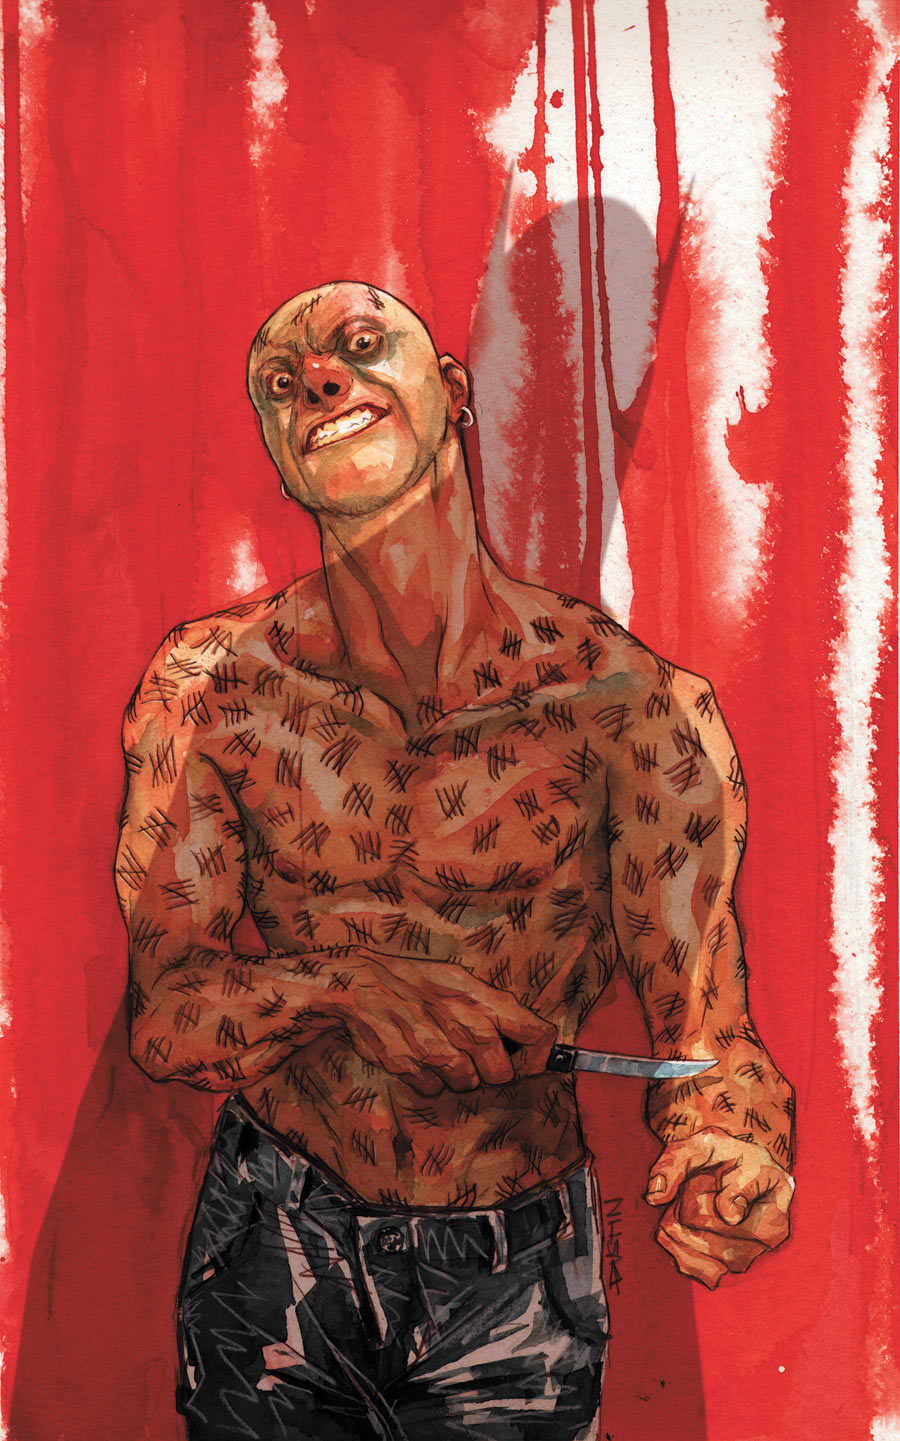 Unlucky 13: Mr. Zsasz with his tally marks